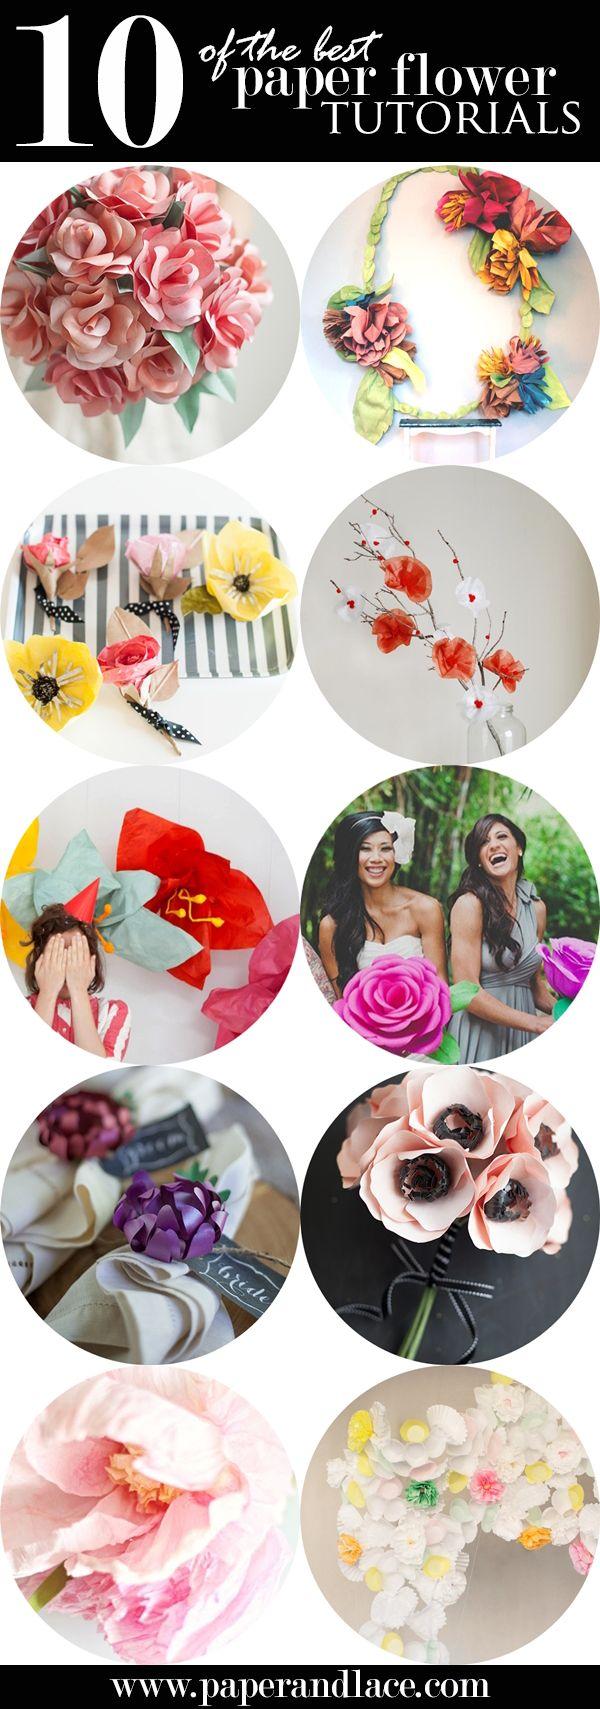 Mariage - 10 Of The BEST Paper Flower Tutorials. Which One Would You Make